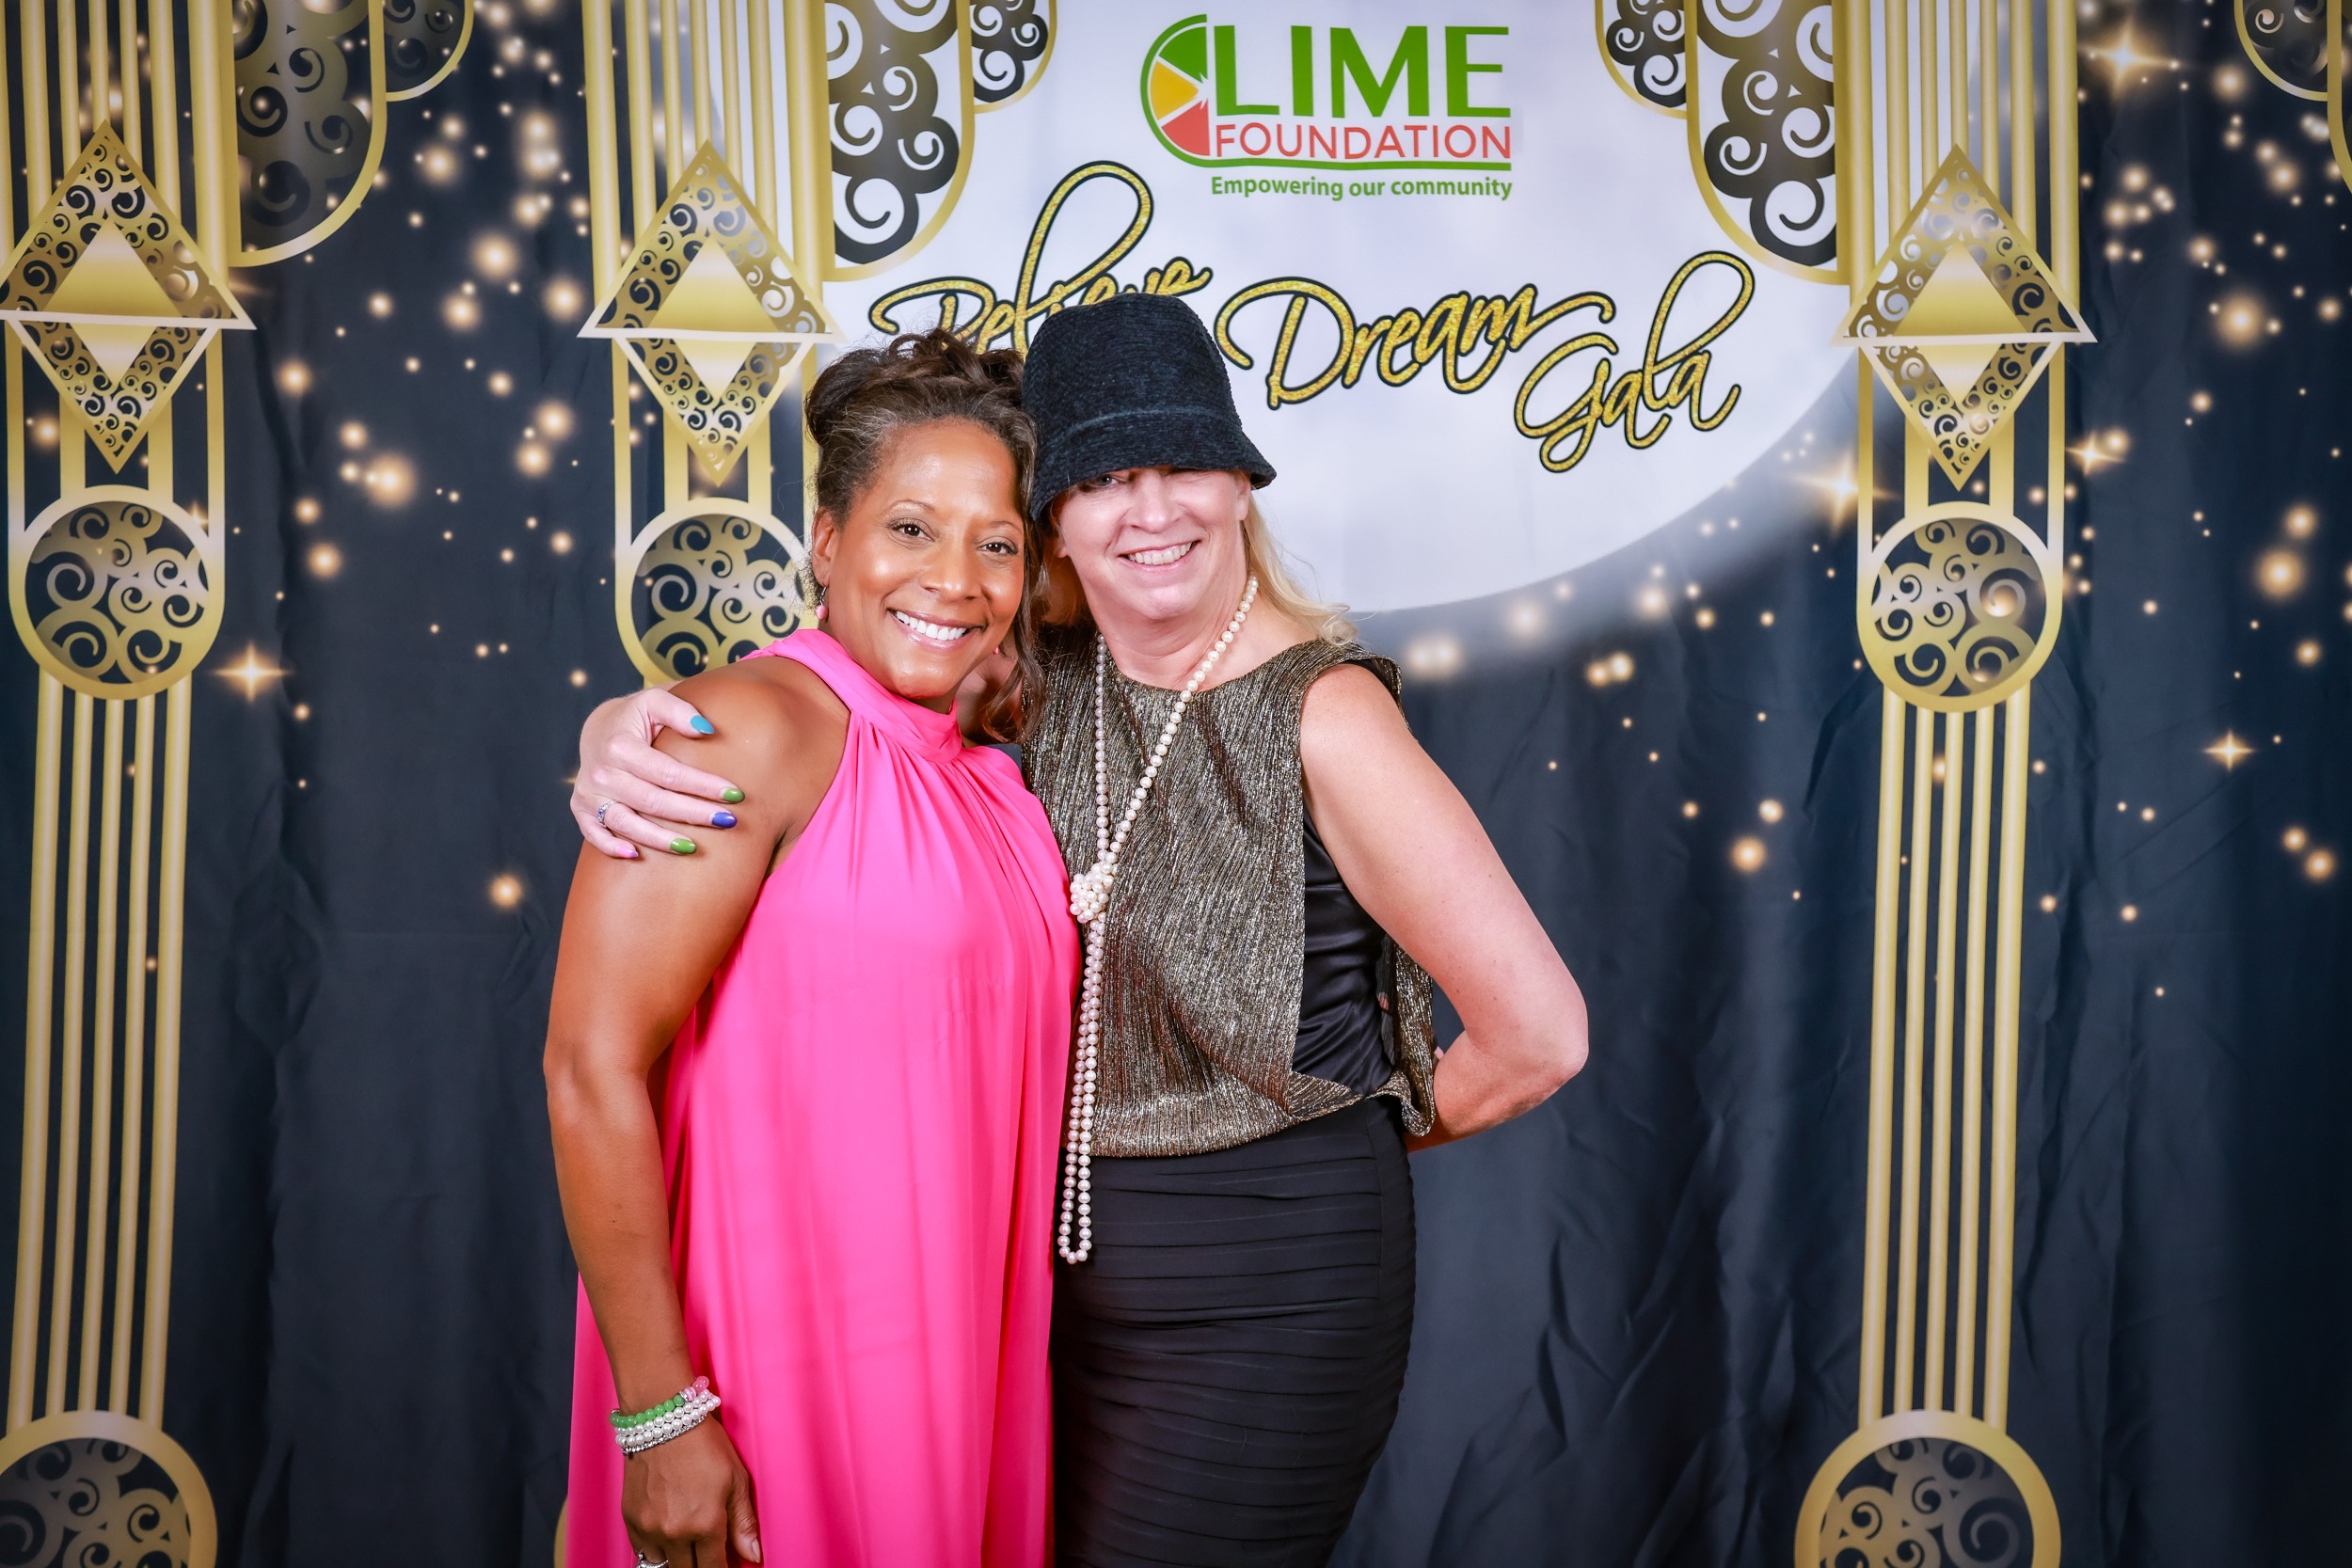 Two women posing for a photo at a photo booth sponsored by The LIME Foundation.